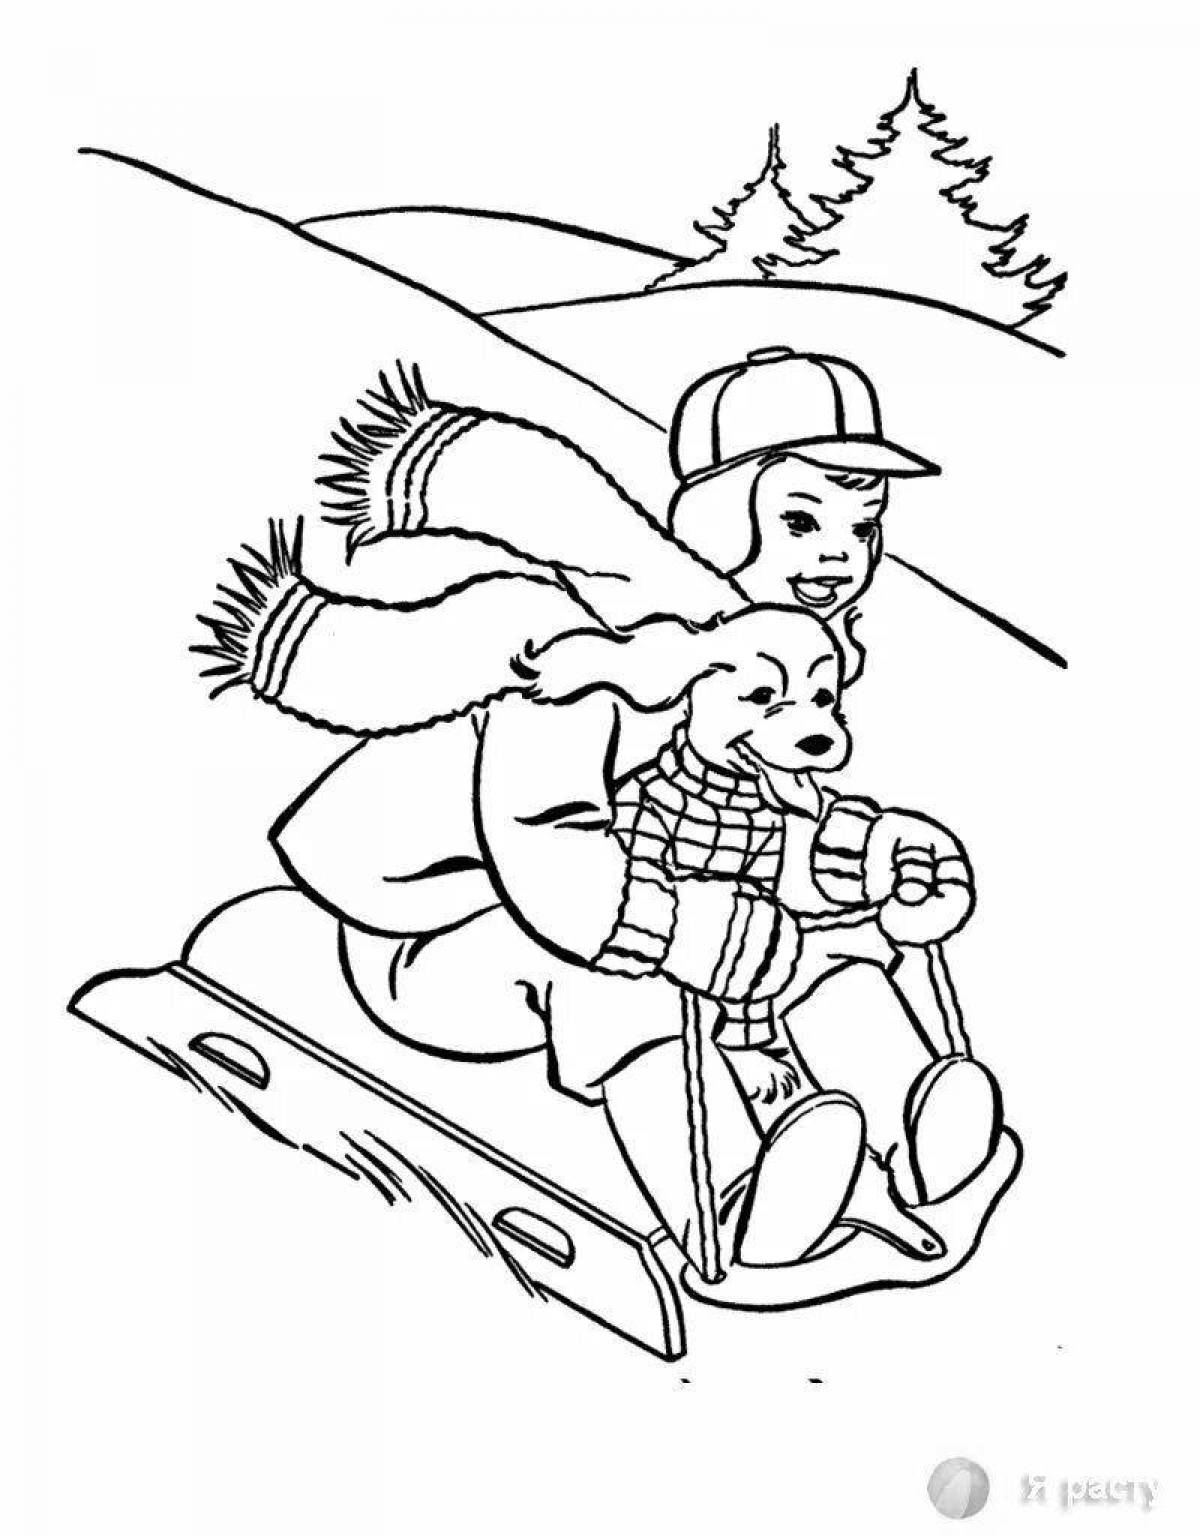 Colorful snow slide coloring page